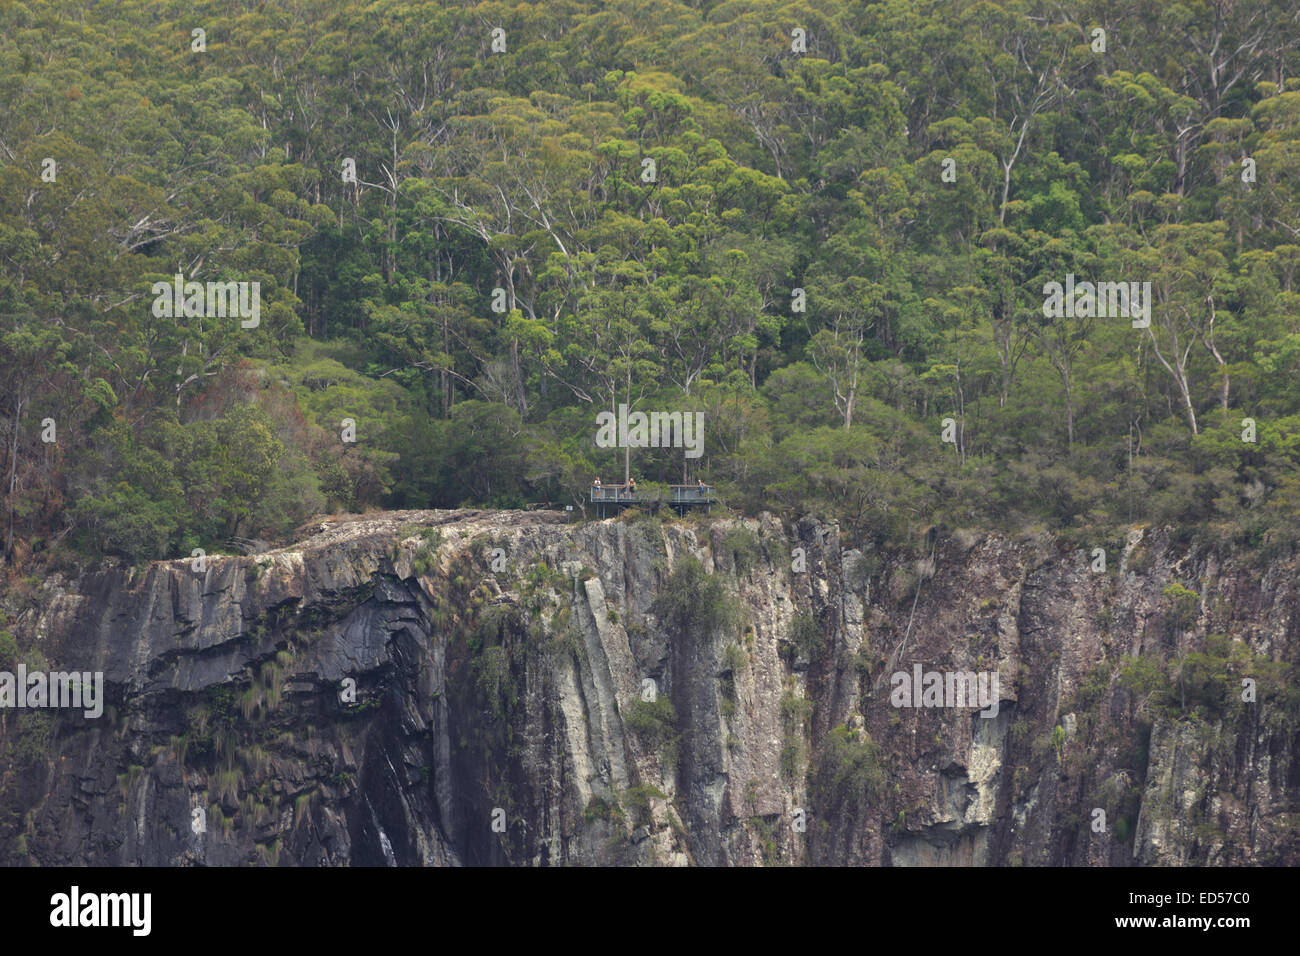 A photograph of Minyon Falls near Byron Bay in Australia. The waterfall is a popular visitor attraction. Stock Photo